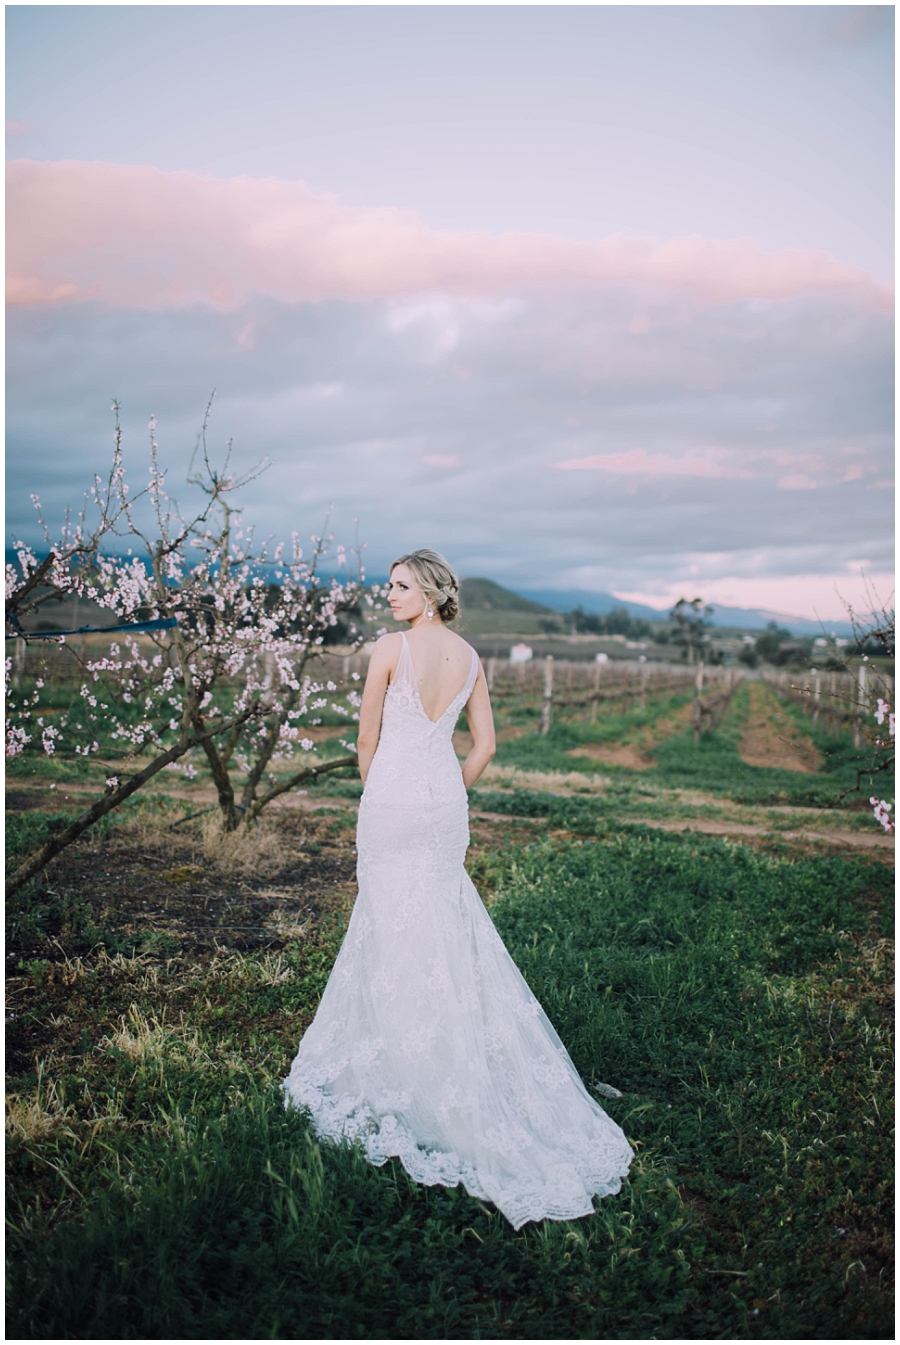 Ronel Kruger Cape Town Wedding and Lifestyle Photographer_6078.jpg